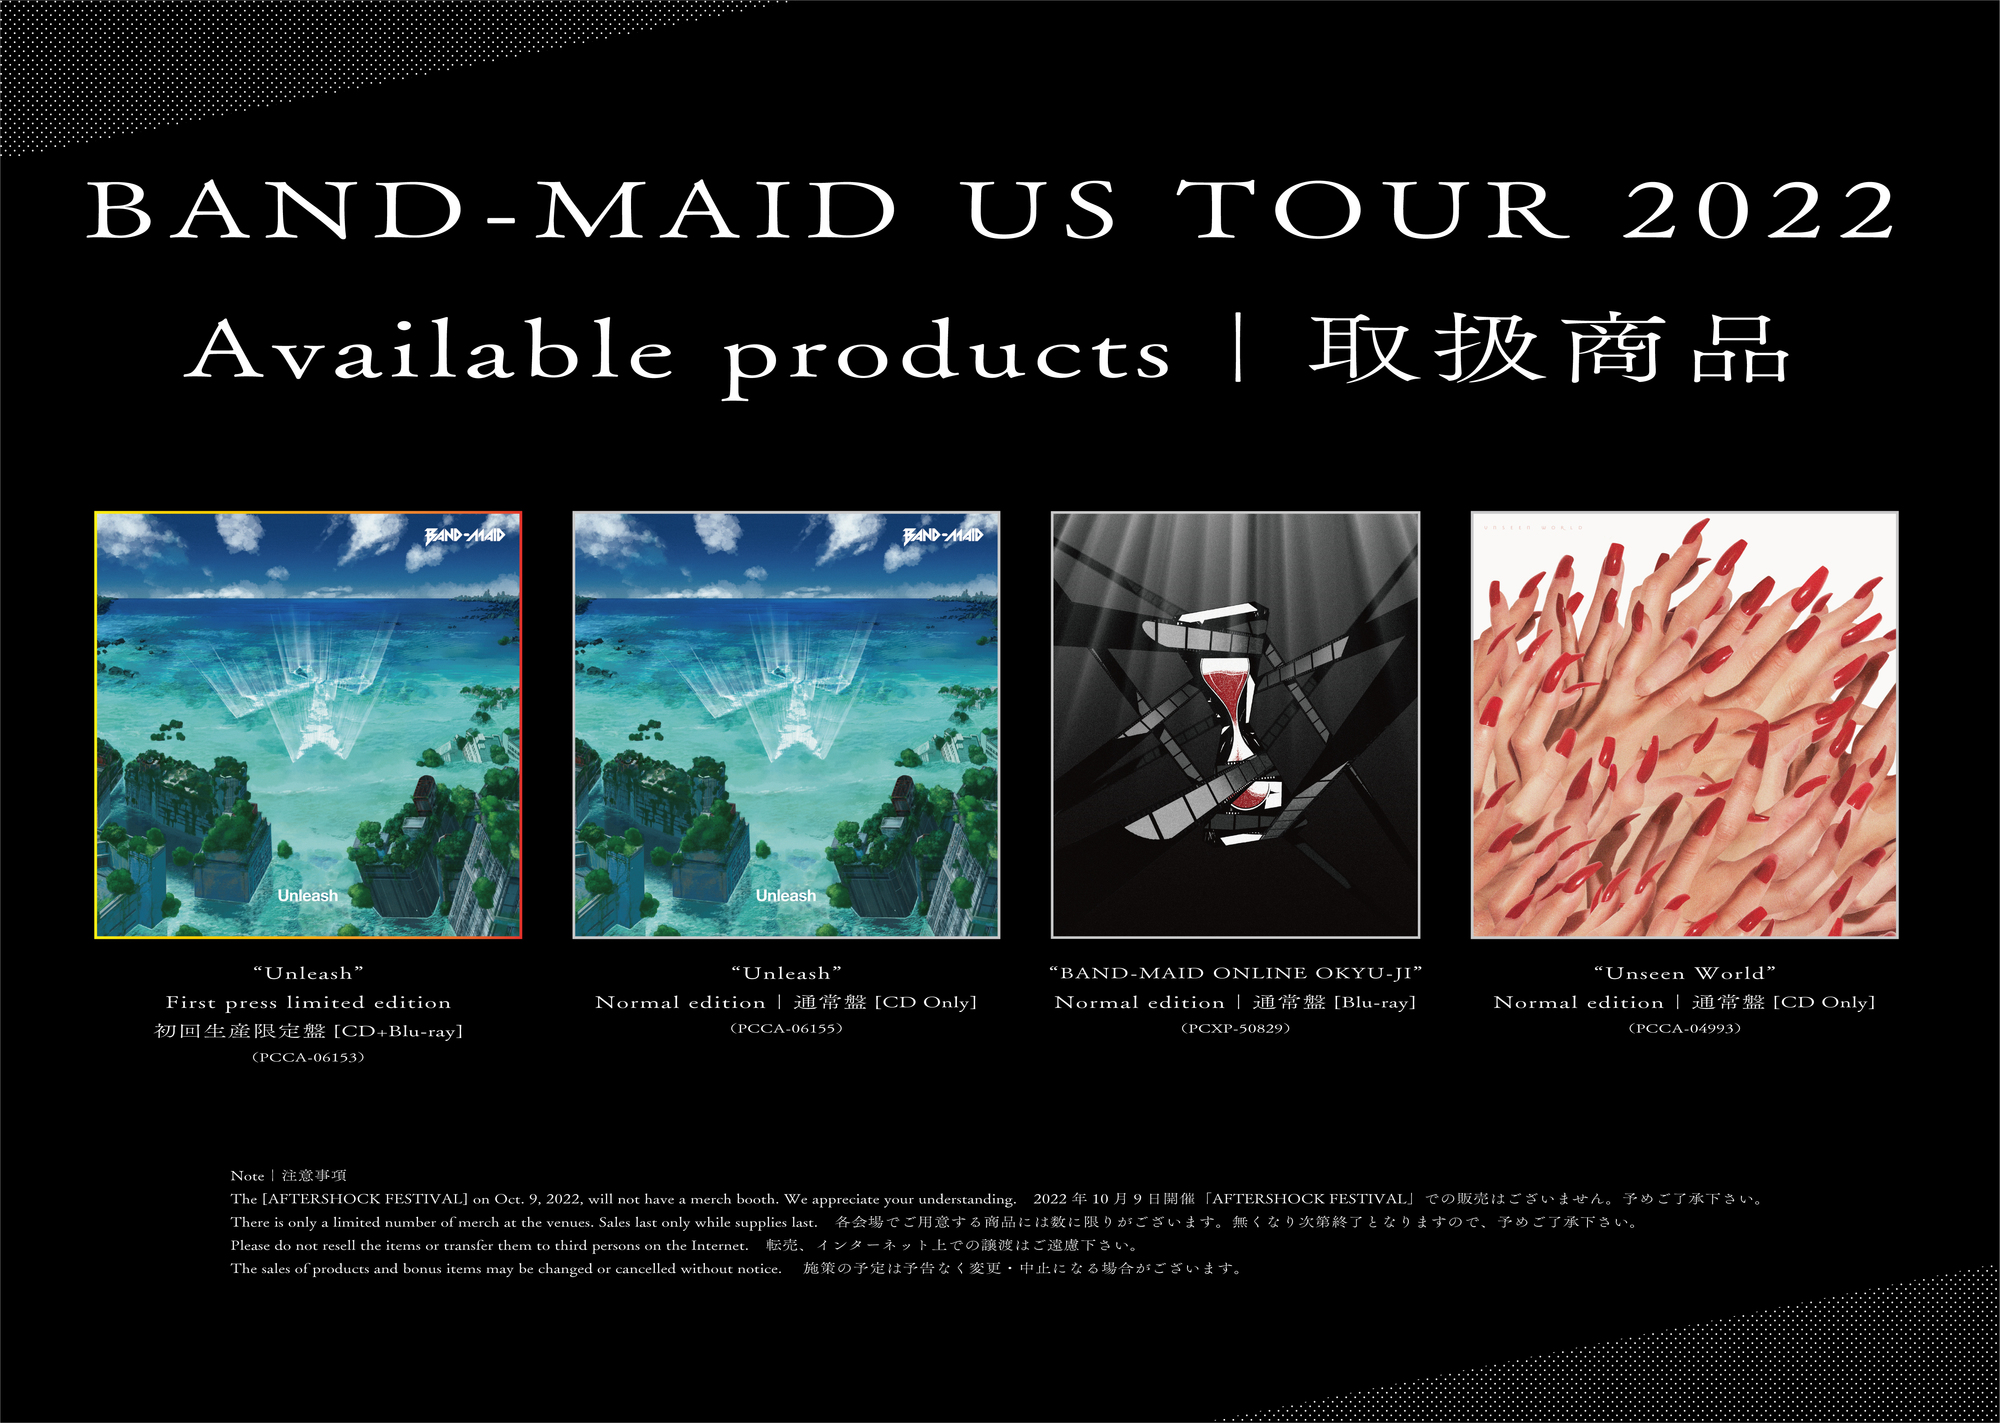 [Tickets Guidance] "BANDMAID US TOUR 2022" BANDMAID Official Web Site